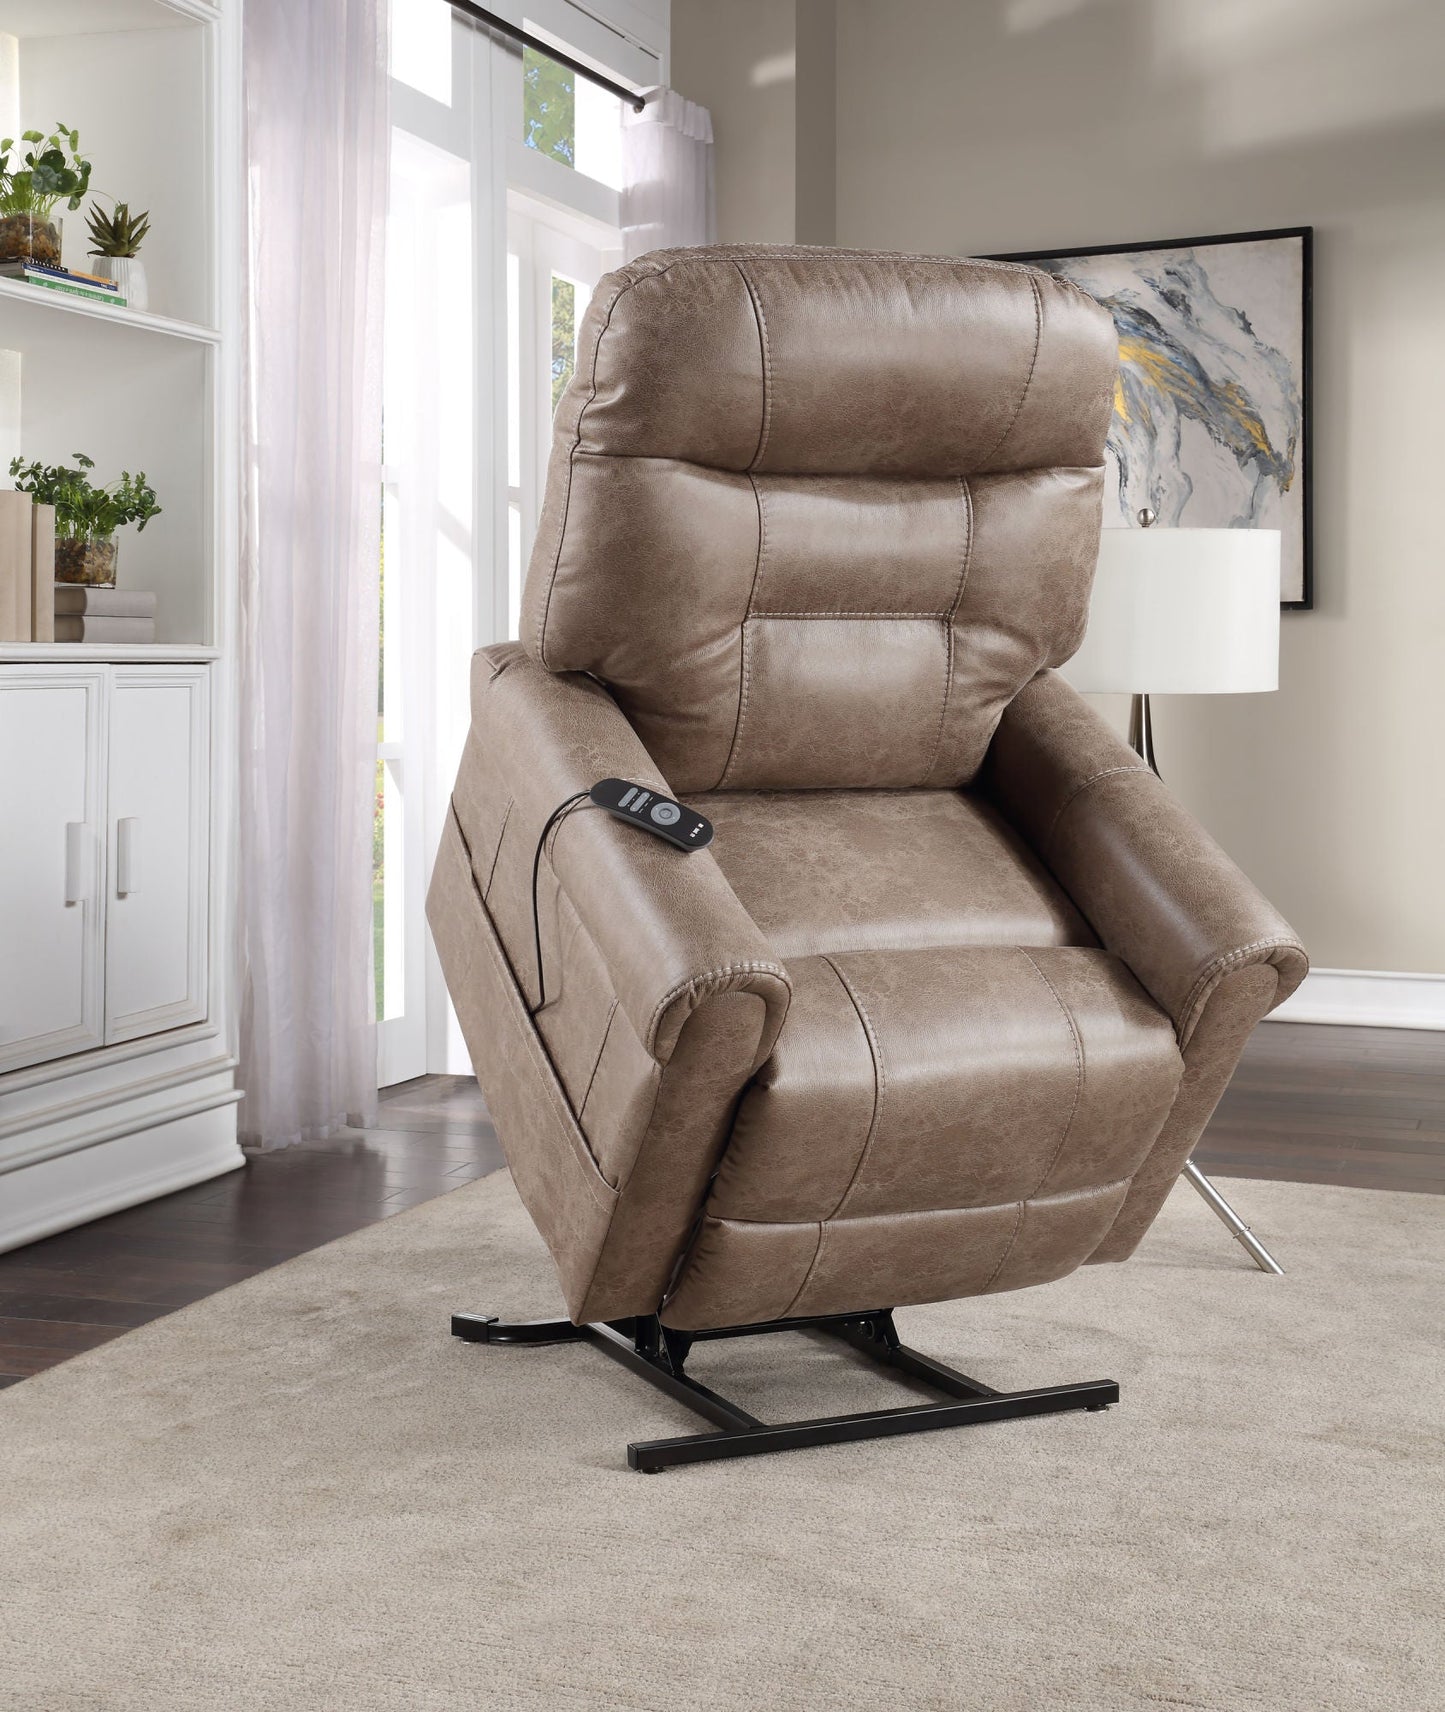 Classic Rolled Arm Power Lift-Chair Recliner - Heat, Adjustable Massage - Plush Seating, High-Grade Polyester Fabric Home Decor by Design